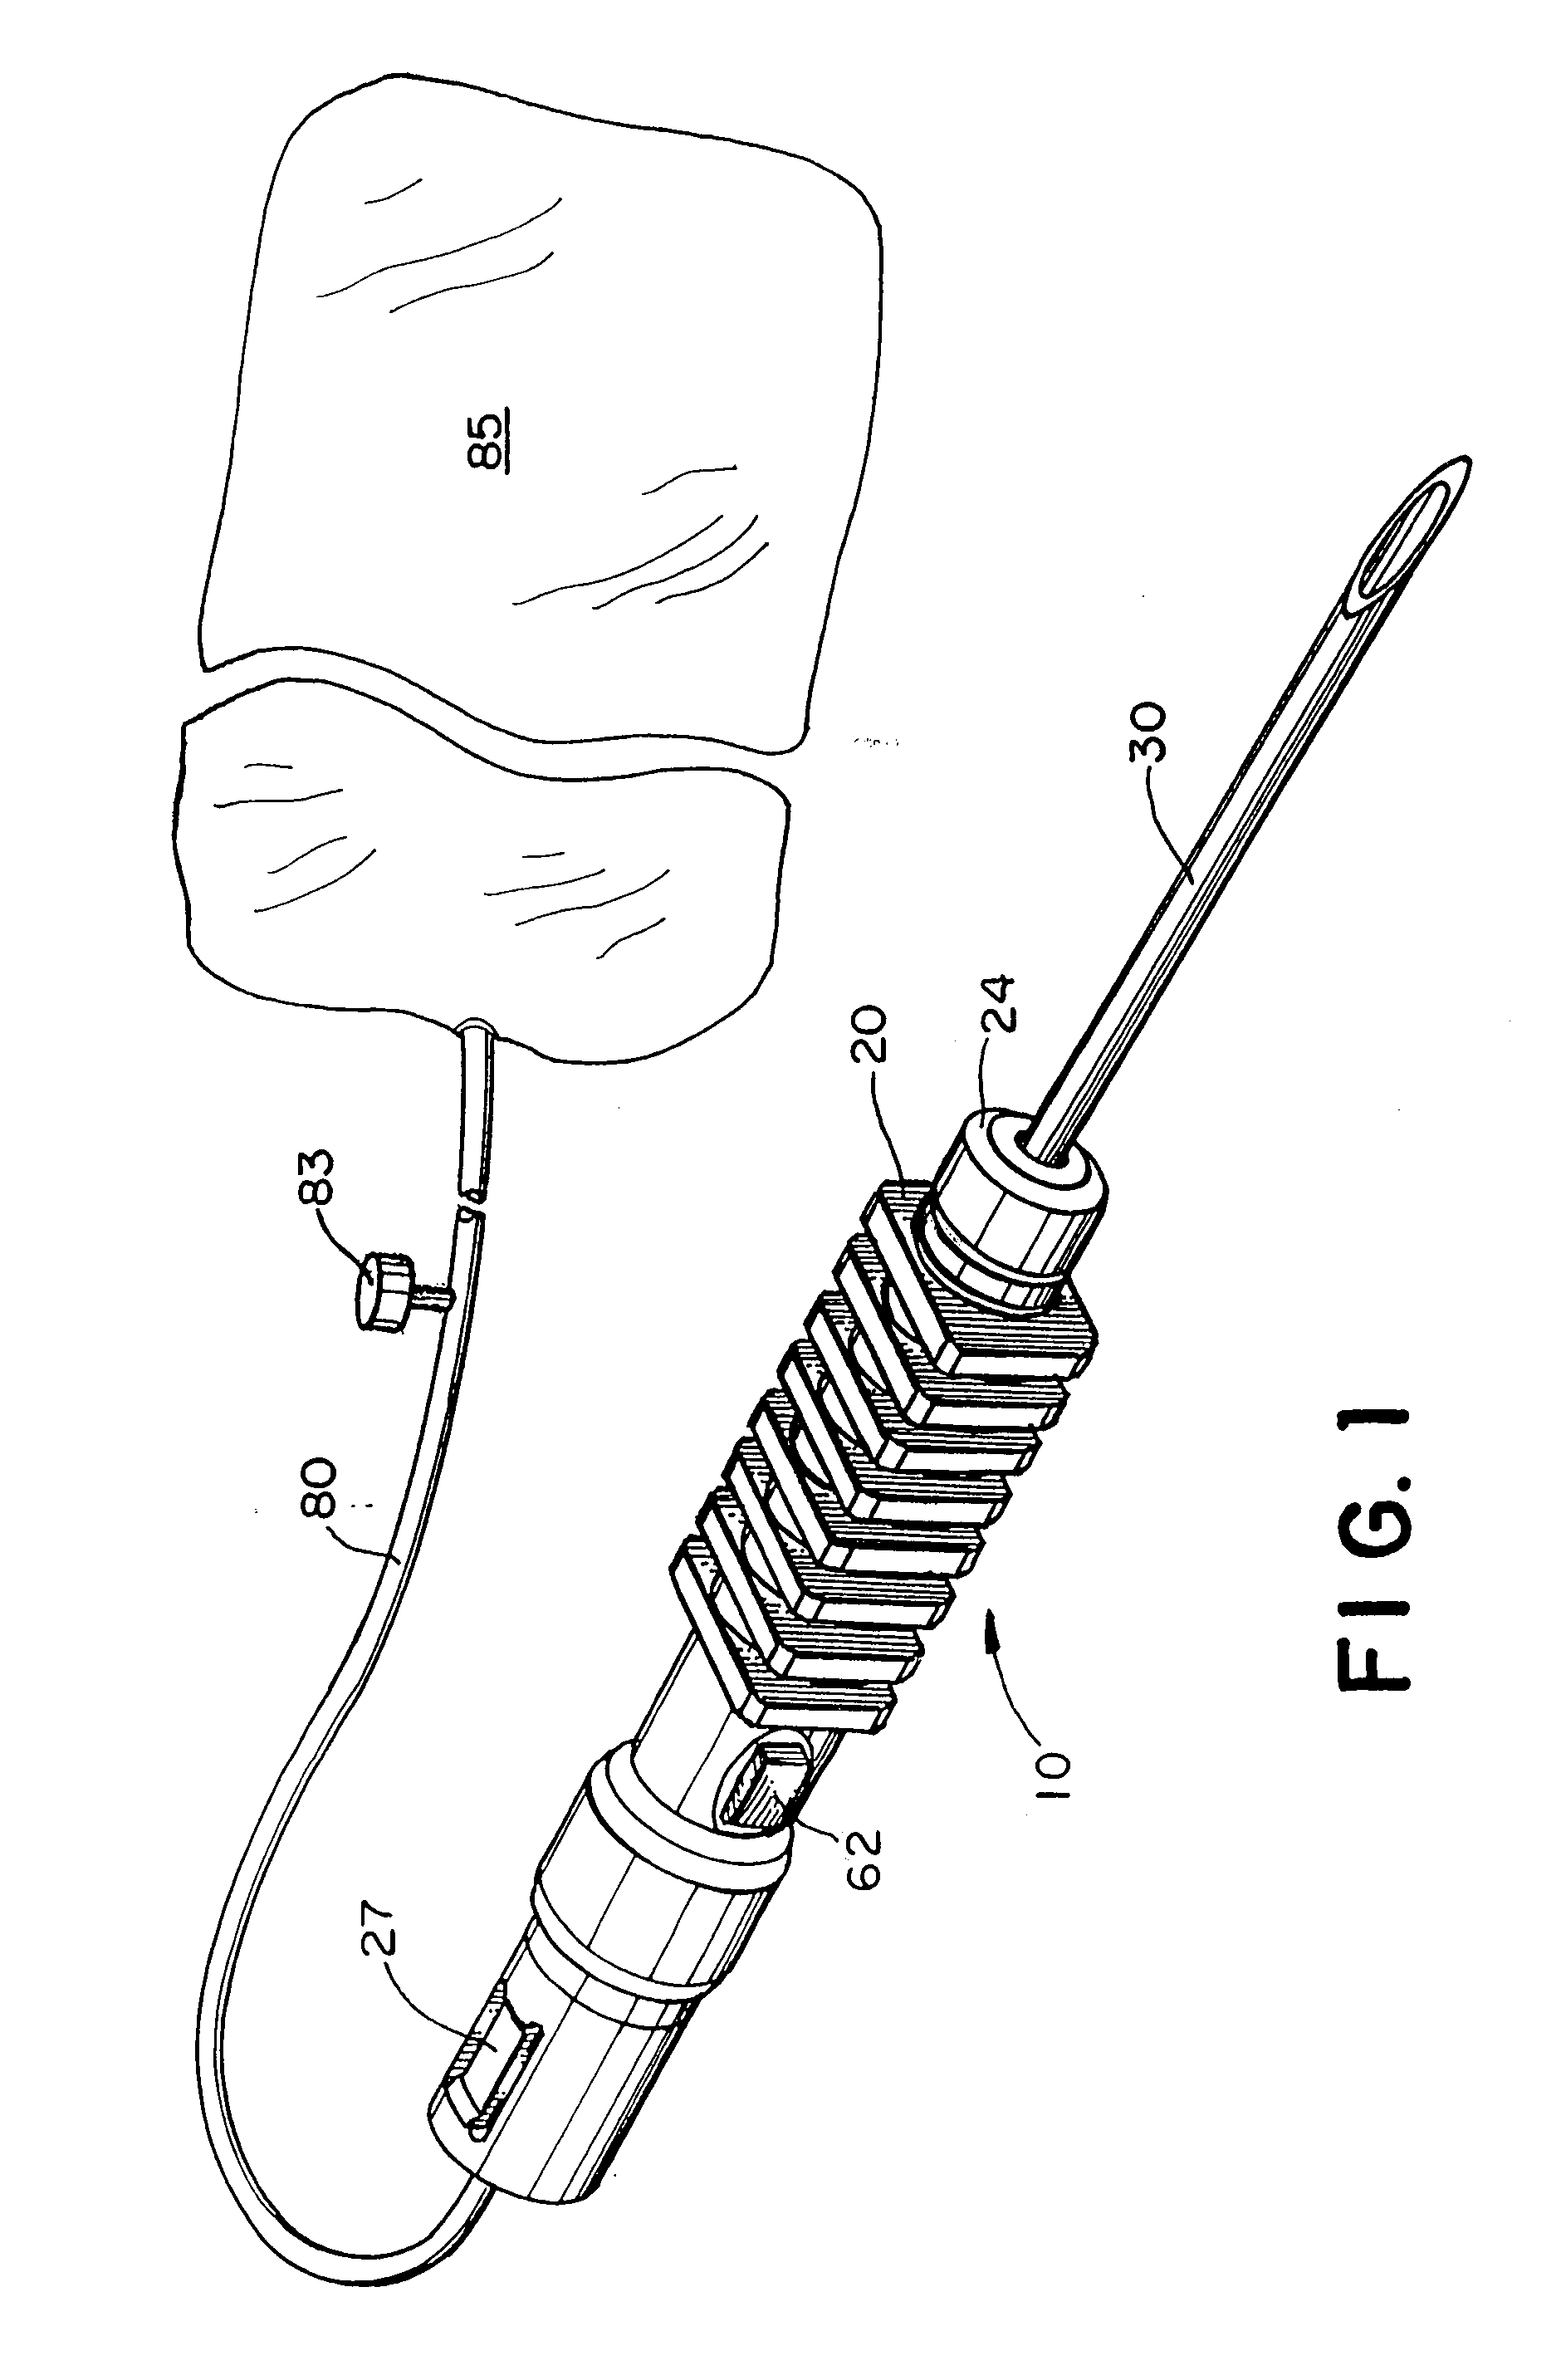 Fluid Collection Device with Retractable Needle and Safety Sampling Access Needle Adapter